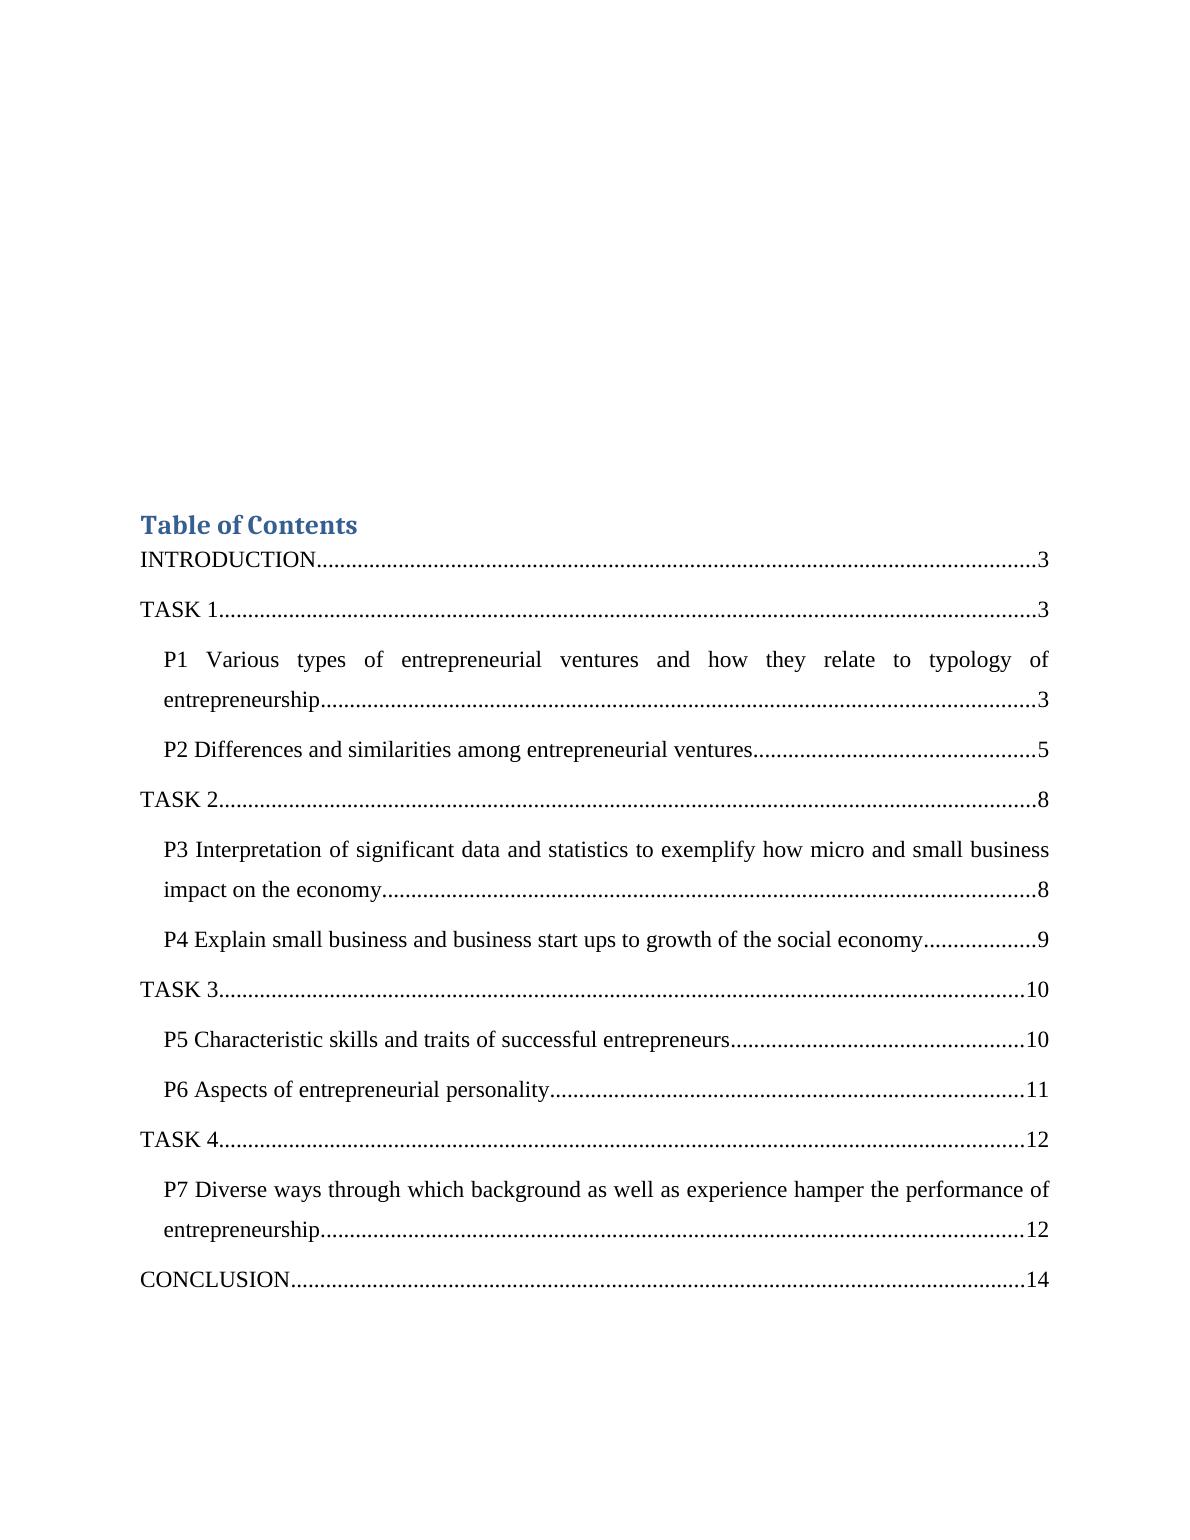 (PDF) Entrepreneurship and Small Business Management Project | Assignment_2